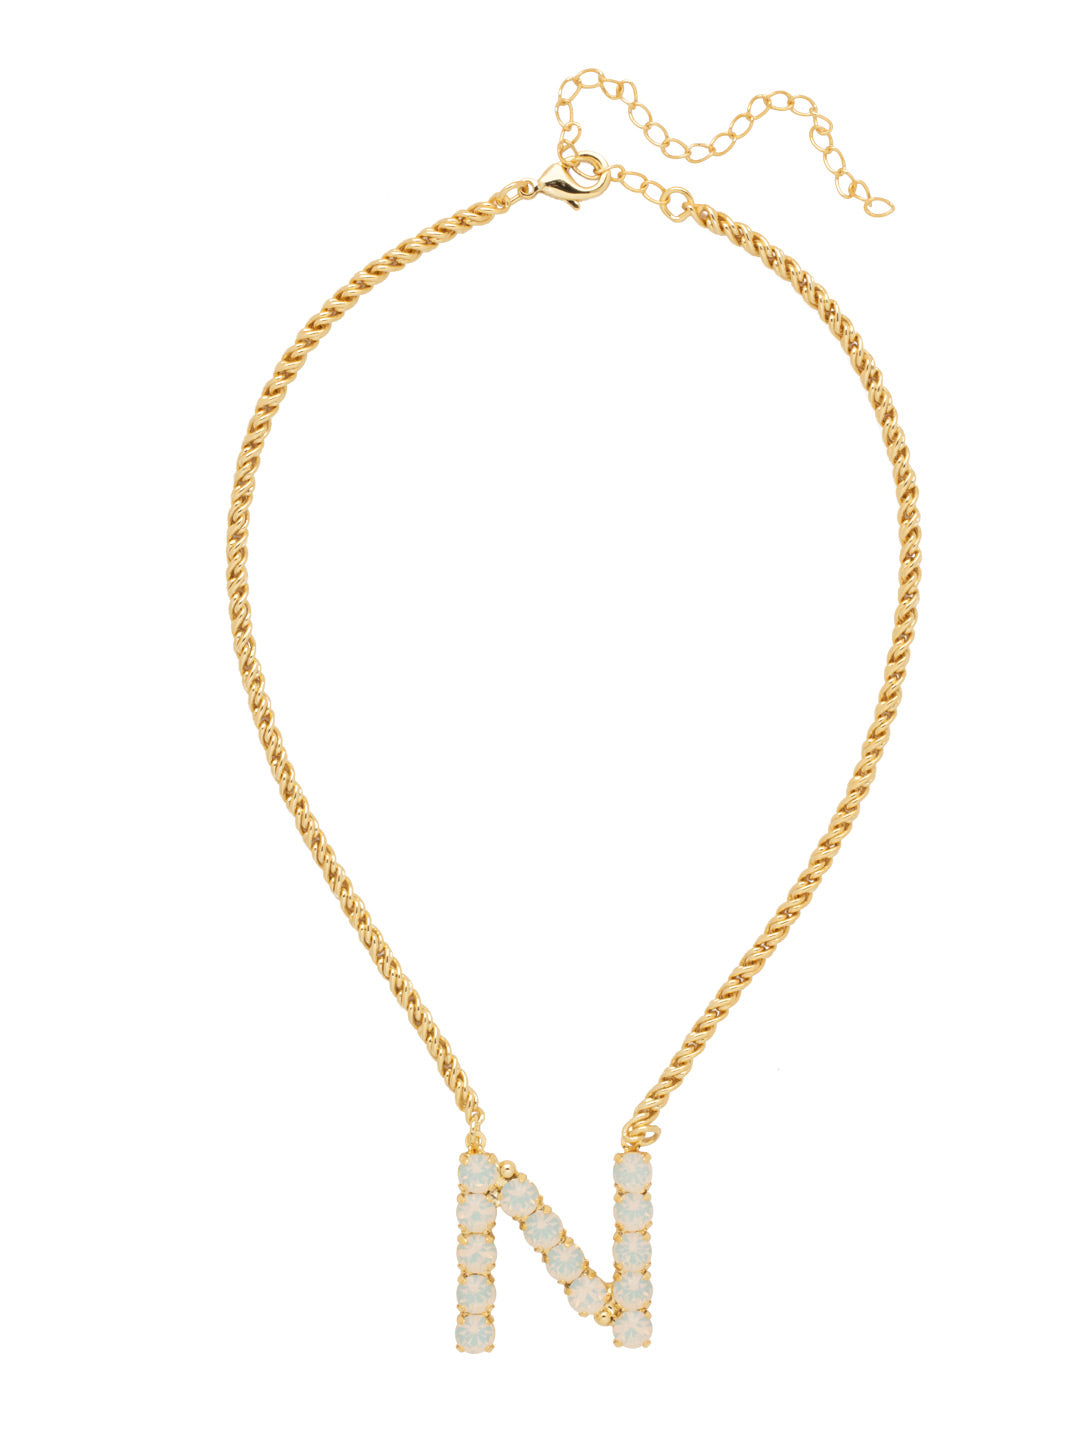 N Initial Rope Pendant Necklace - NFK33BGWO - <p>The Initial Rope Pendant Necklace features a crystal encrusted metal monogram pendant on an adjustable rope chain, secured with a lobster claw clasp. From Sorrelli's White Opal collection in our Bright Gold-tone finish.</p>